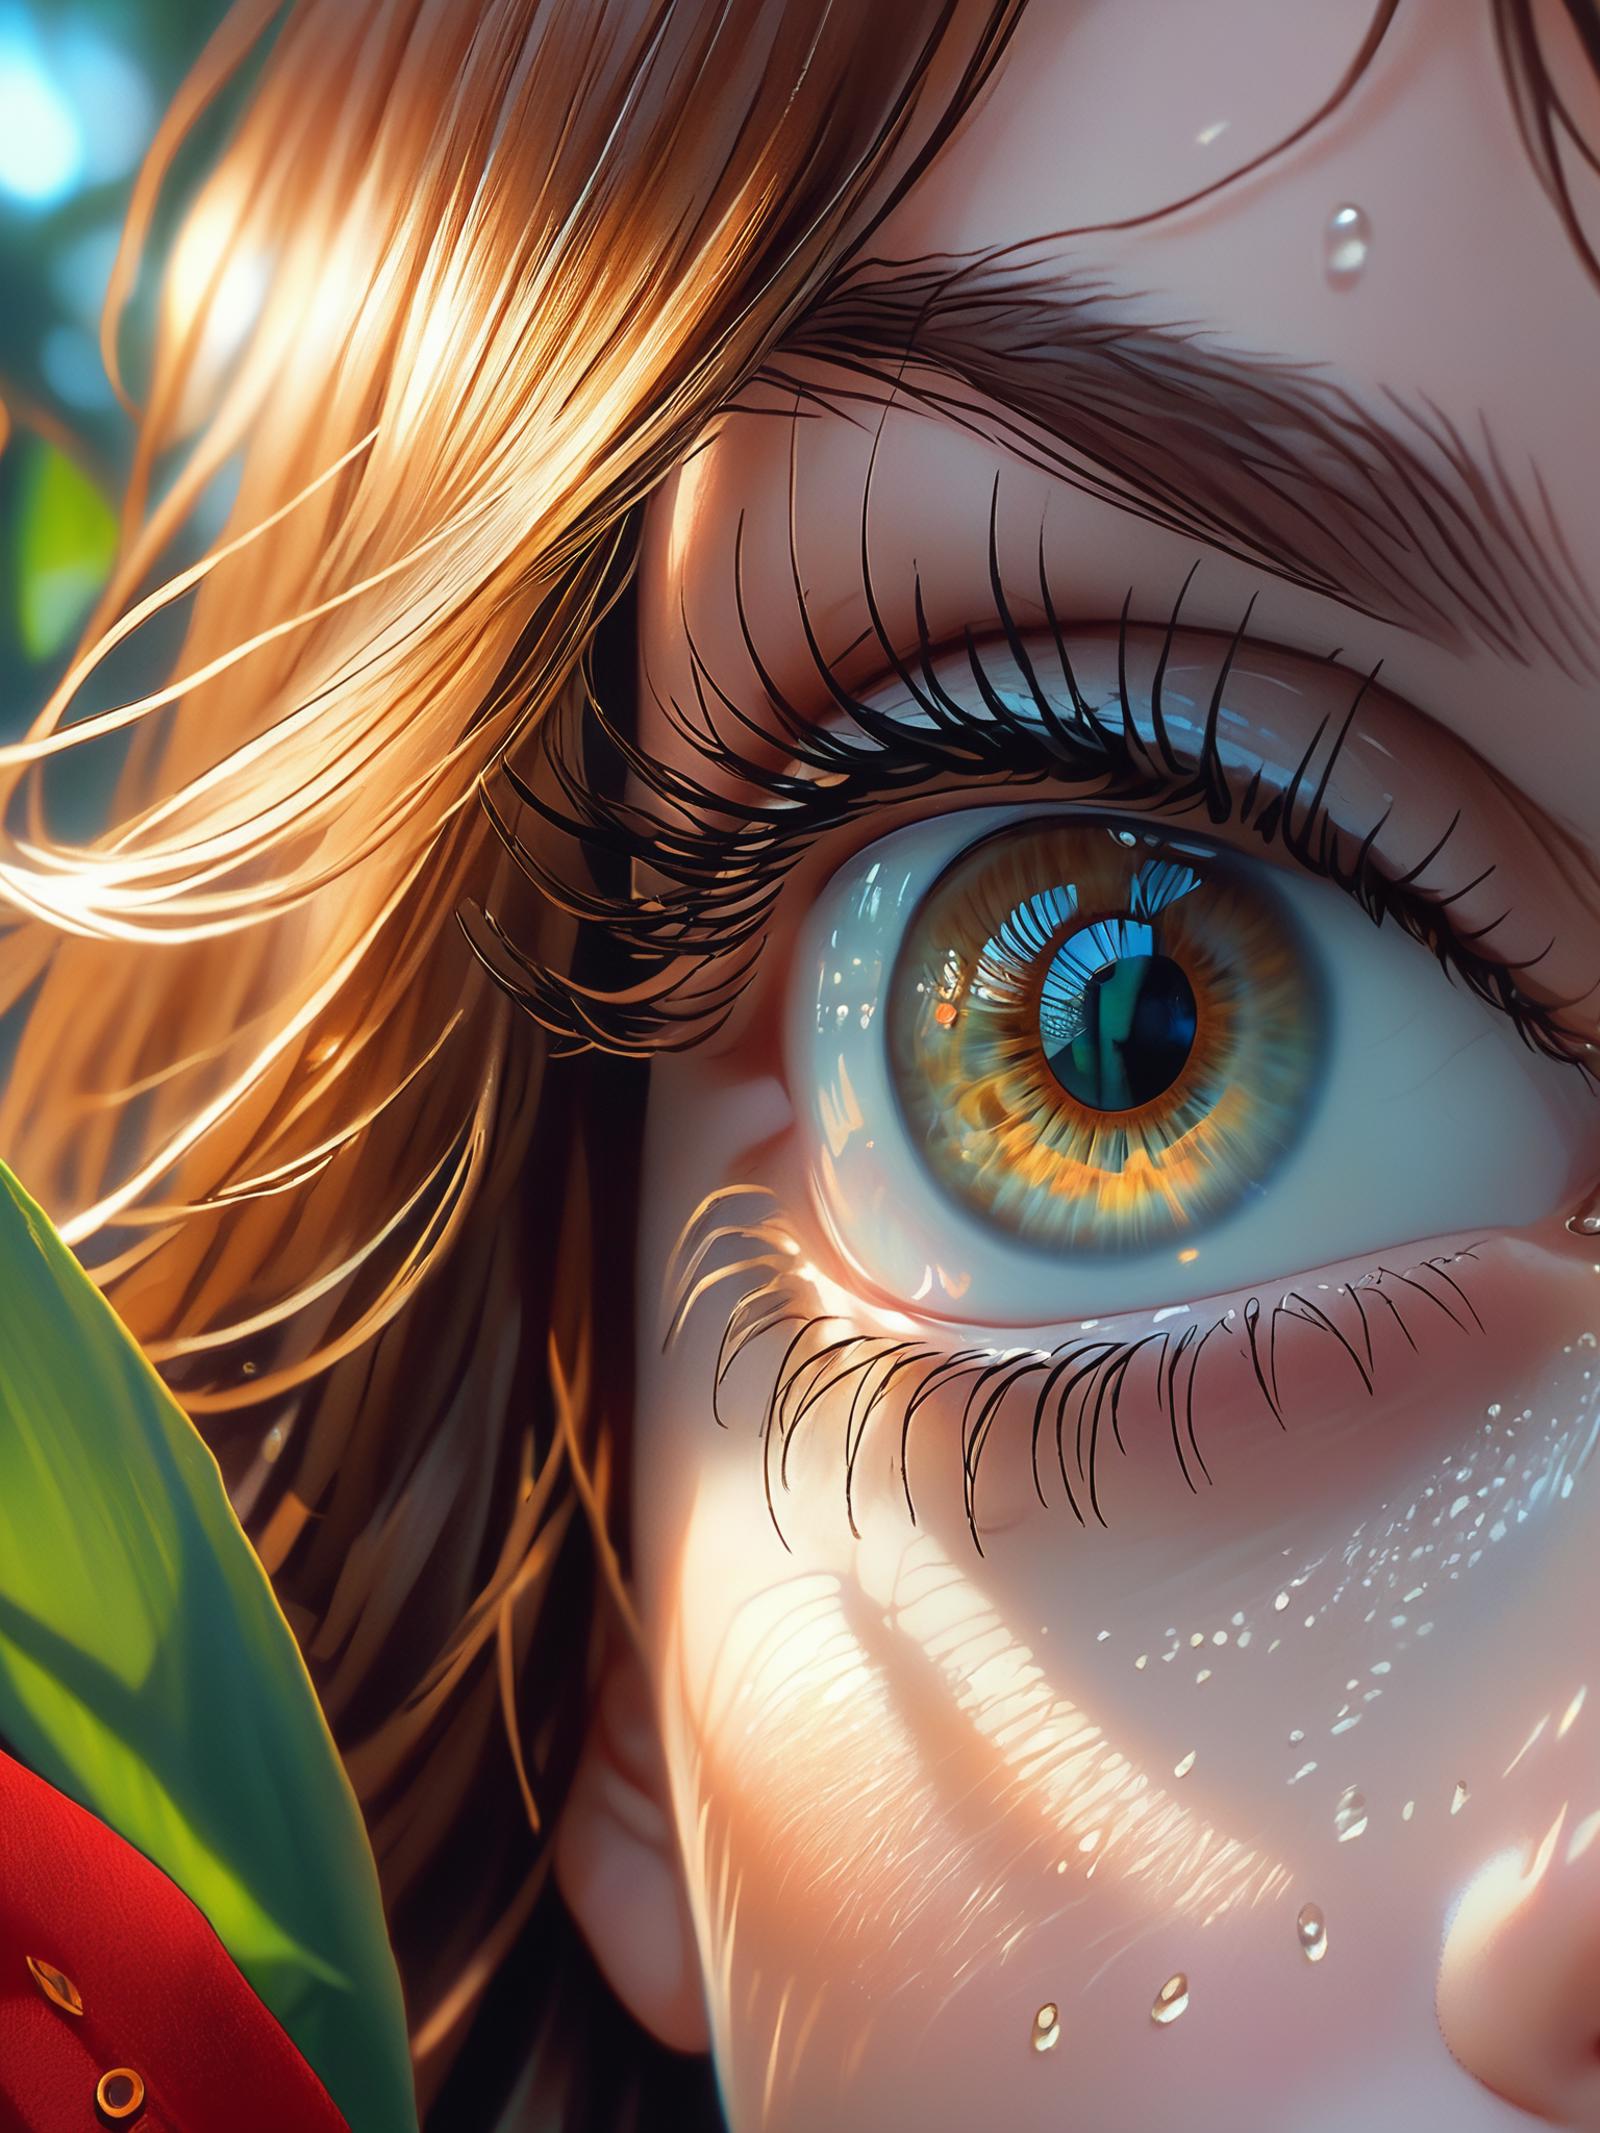 A close-up of a woman's eye with a green iris.